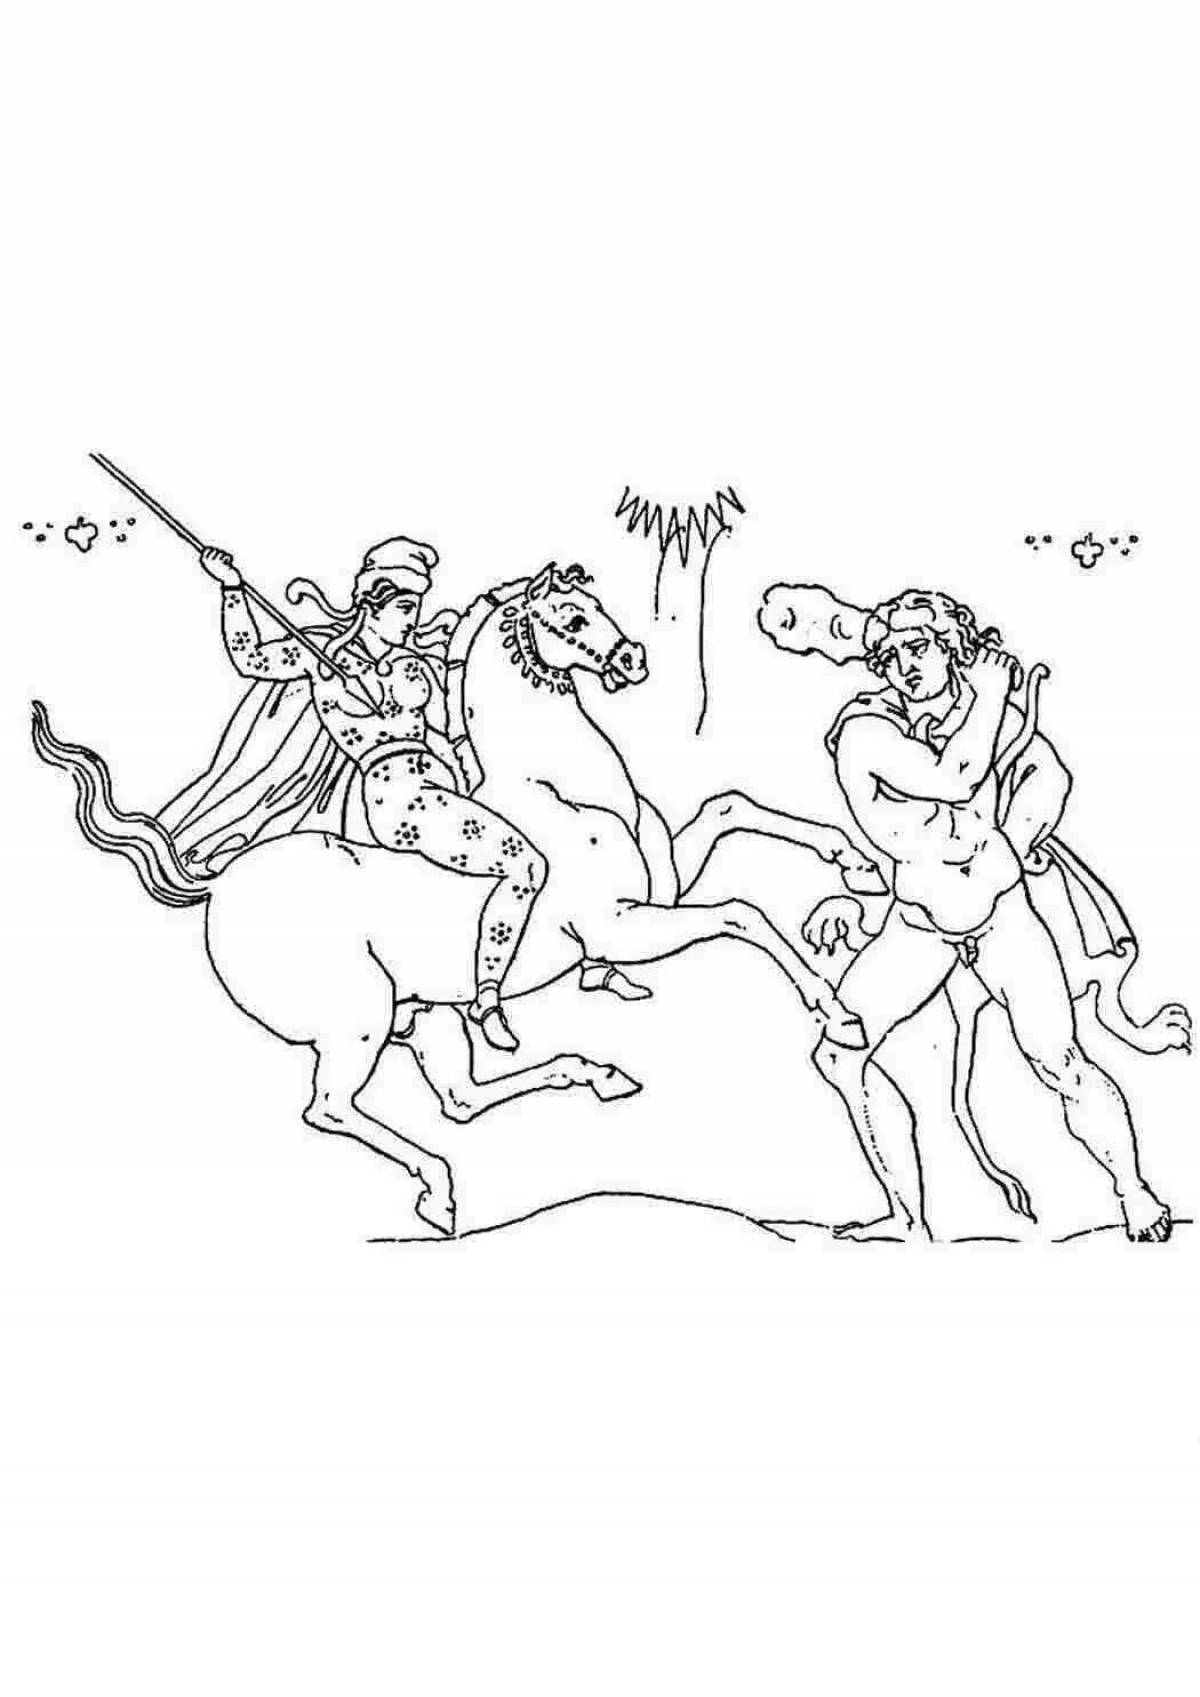 The 12 Labors of Hercules amazing coloring pages